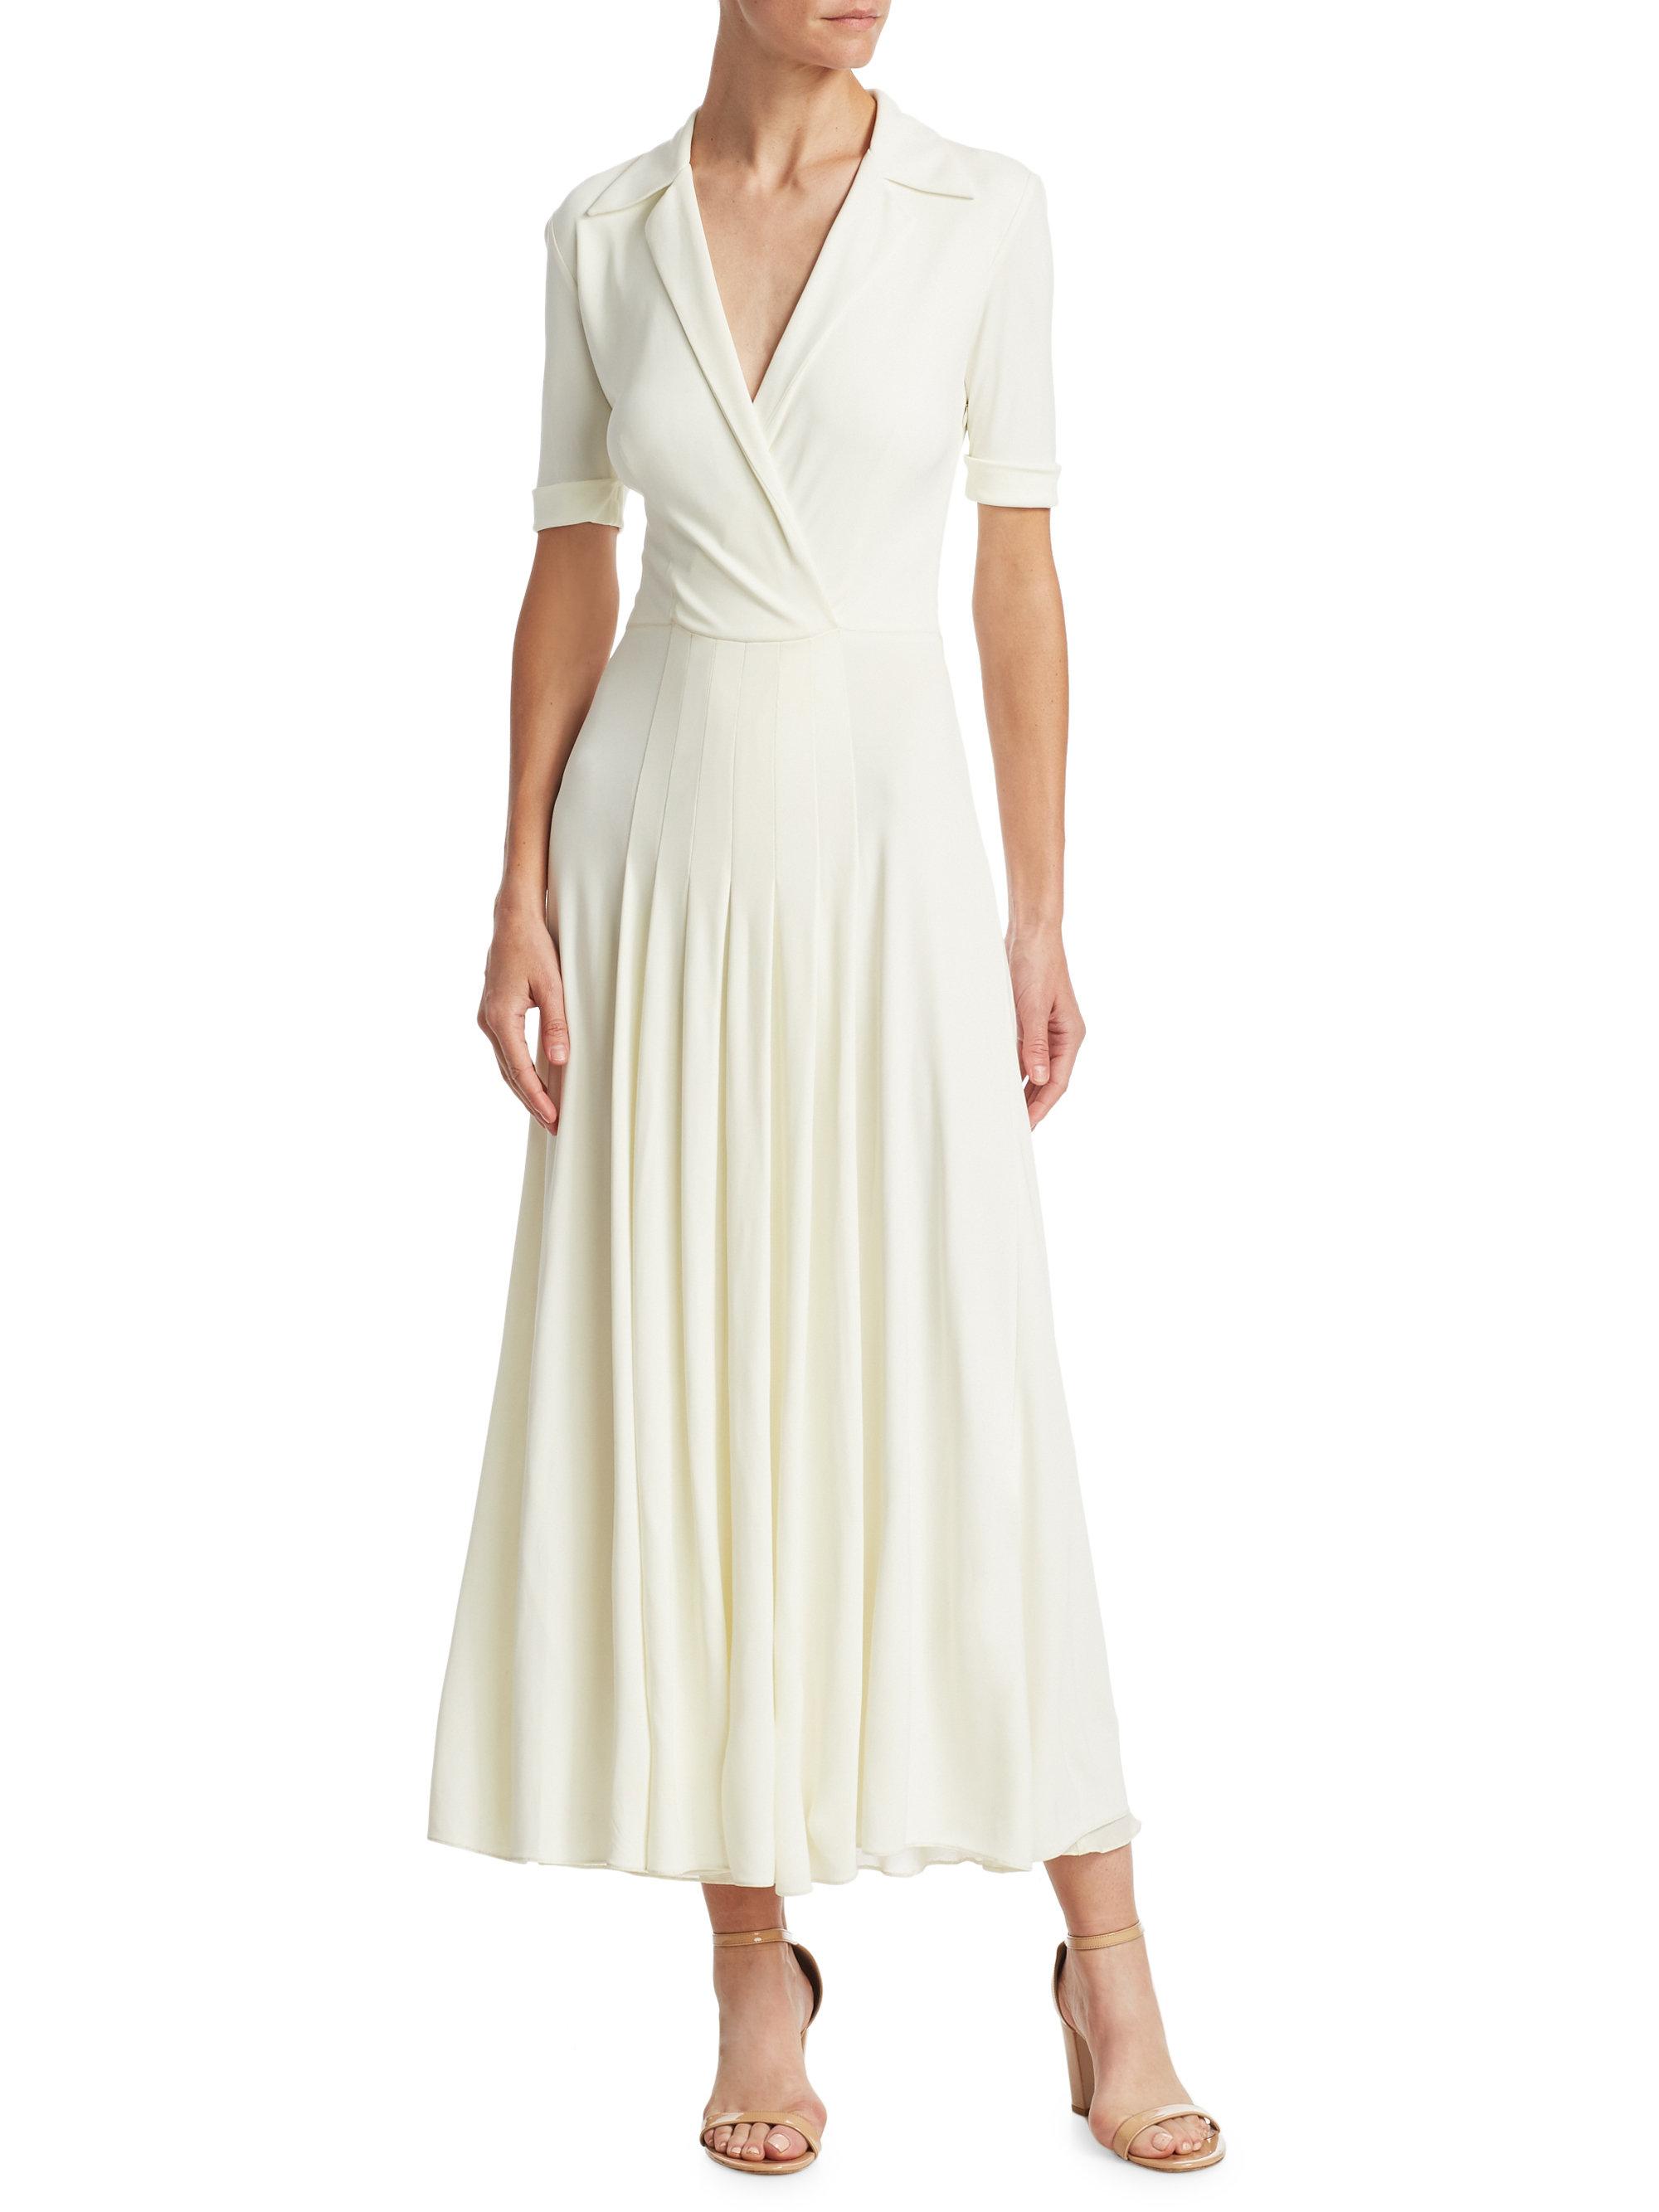 Ralph Lauren Collection Tabatha Jersey Dress in White | Lyst